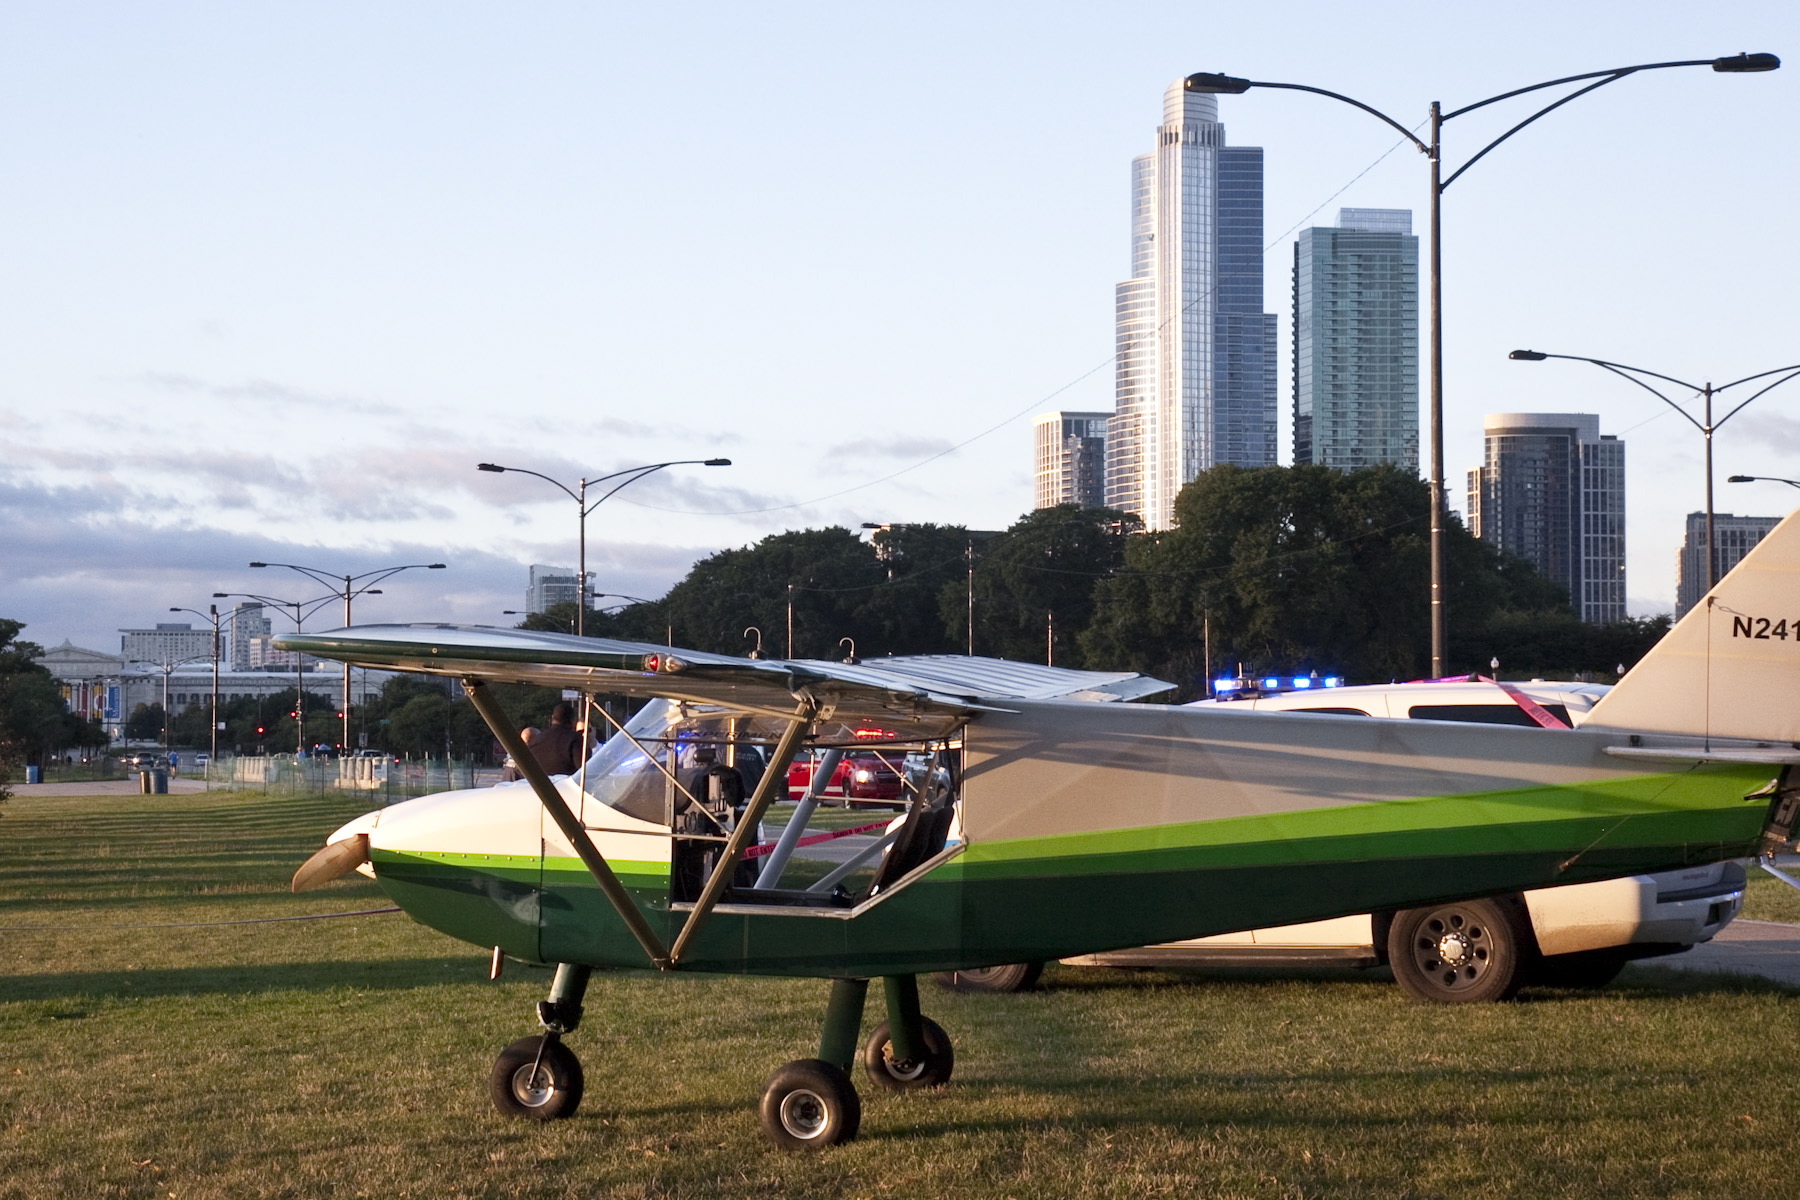 A plane is landed near Lake Shore Drive in Chicago early Sunday, Sept. 22, 2013 after the pilot made an emergency landing because of mechanical issues. Pilot John Pederson landed in the northbound lanes of Lake Shore Drive near Grant Park, authorities said.